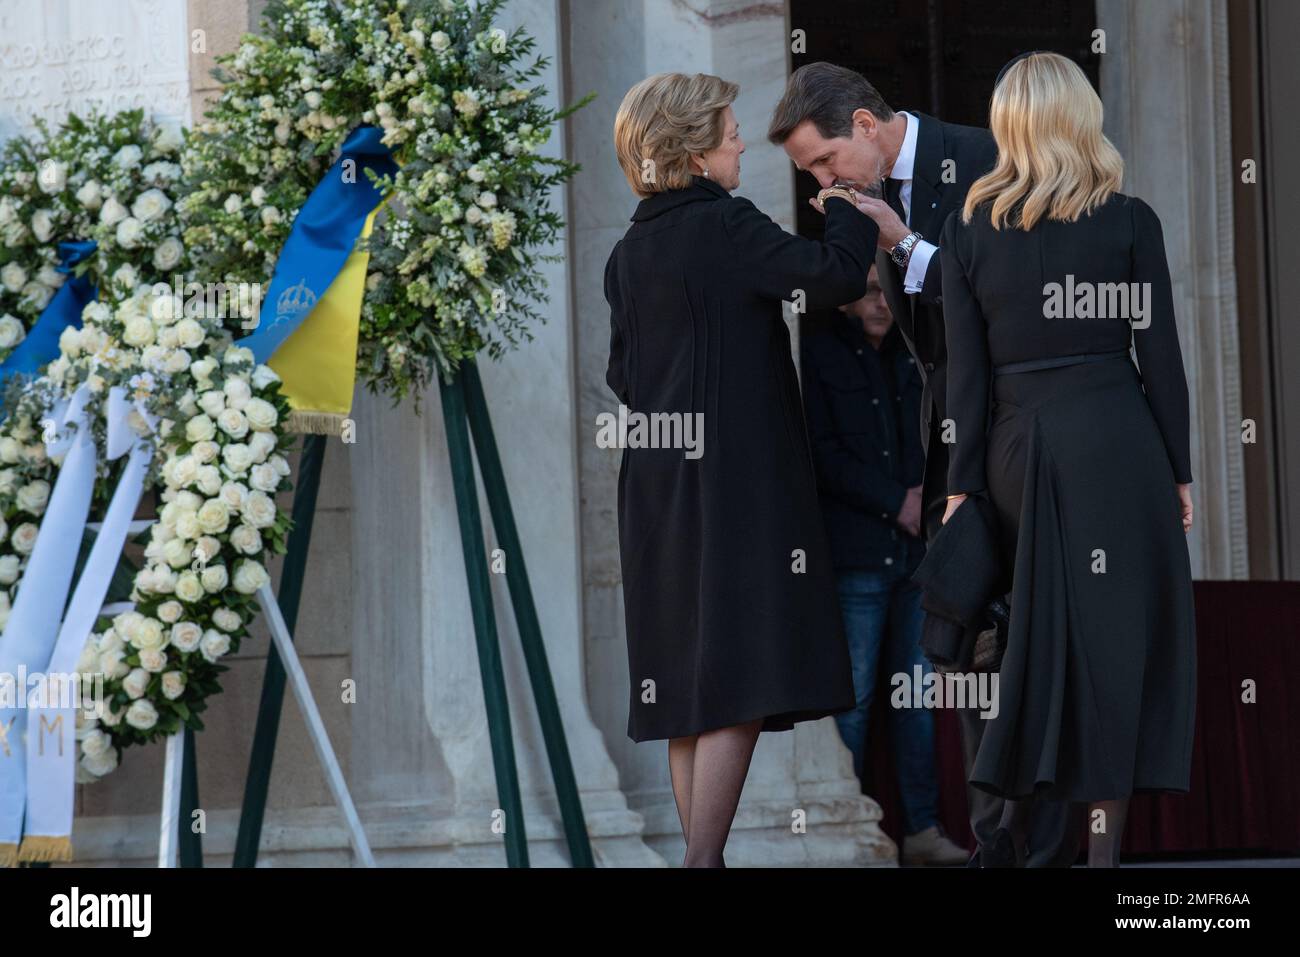 Athens, Greece. 16th January 2023. Crown Prince Pavlos greets Queen Anne-Marie at the funeral of the former King Constantine II of Greece at the Metropolitan Cathedral of Athens. Credit: Nicolas Koutsokostas/Alamy Stock Photo. Stock Photo